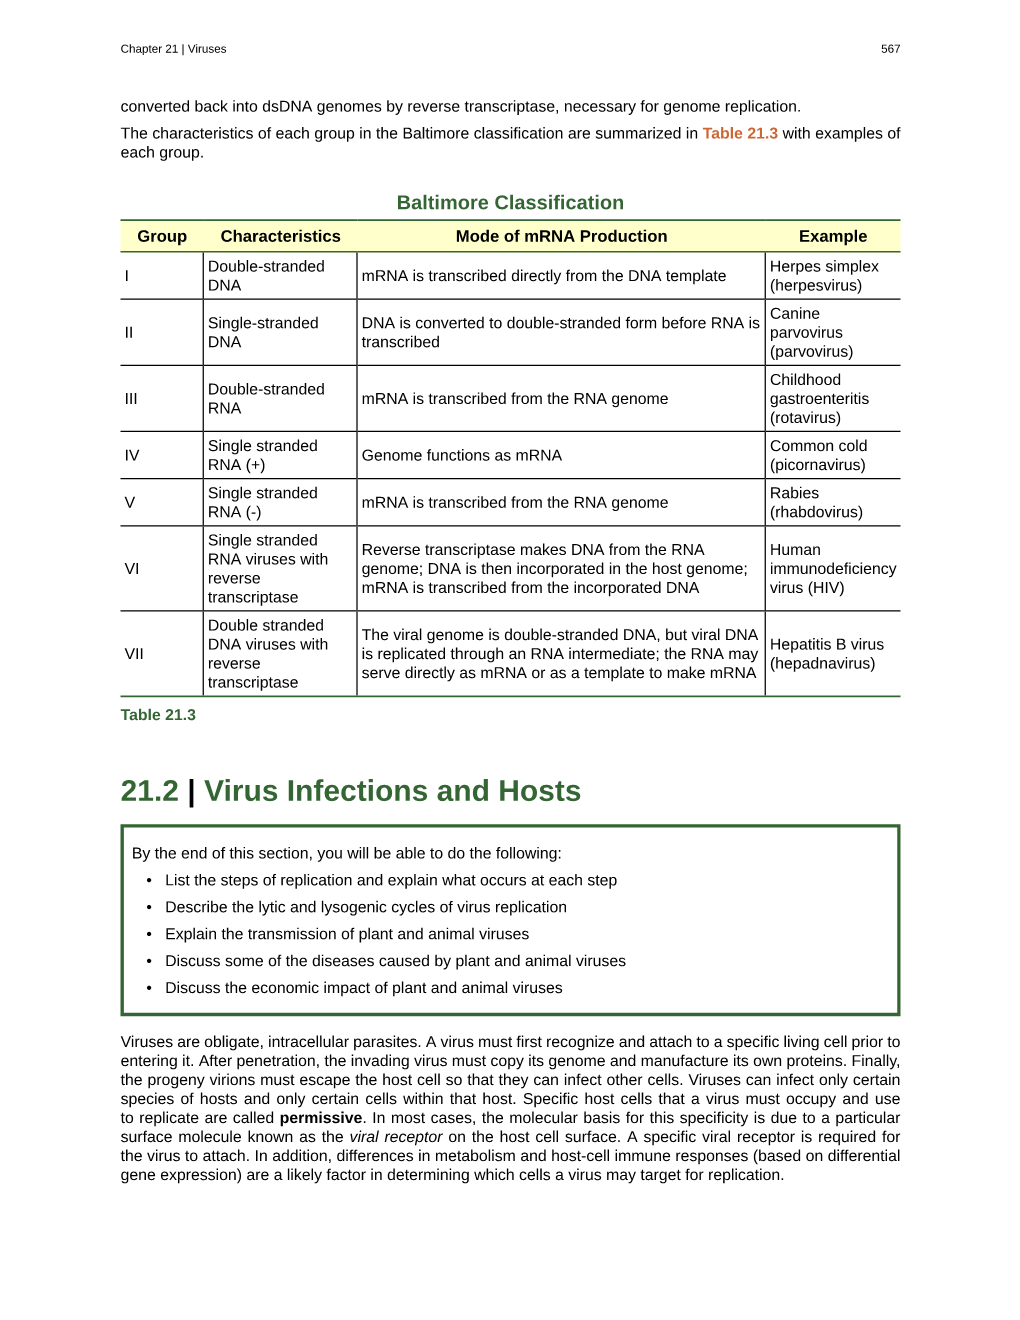 21.2 Virus Infections and Hosts